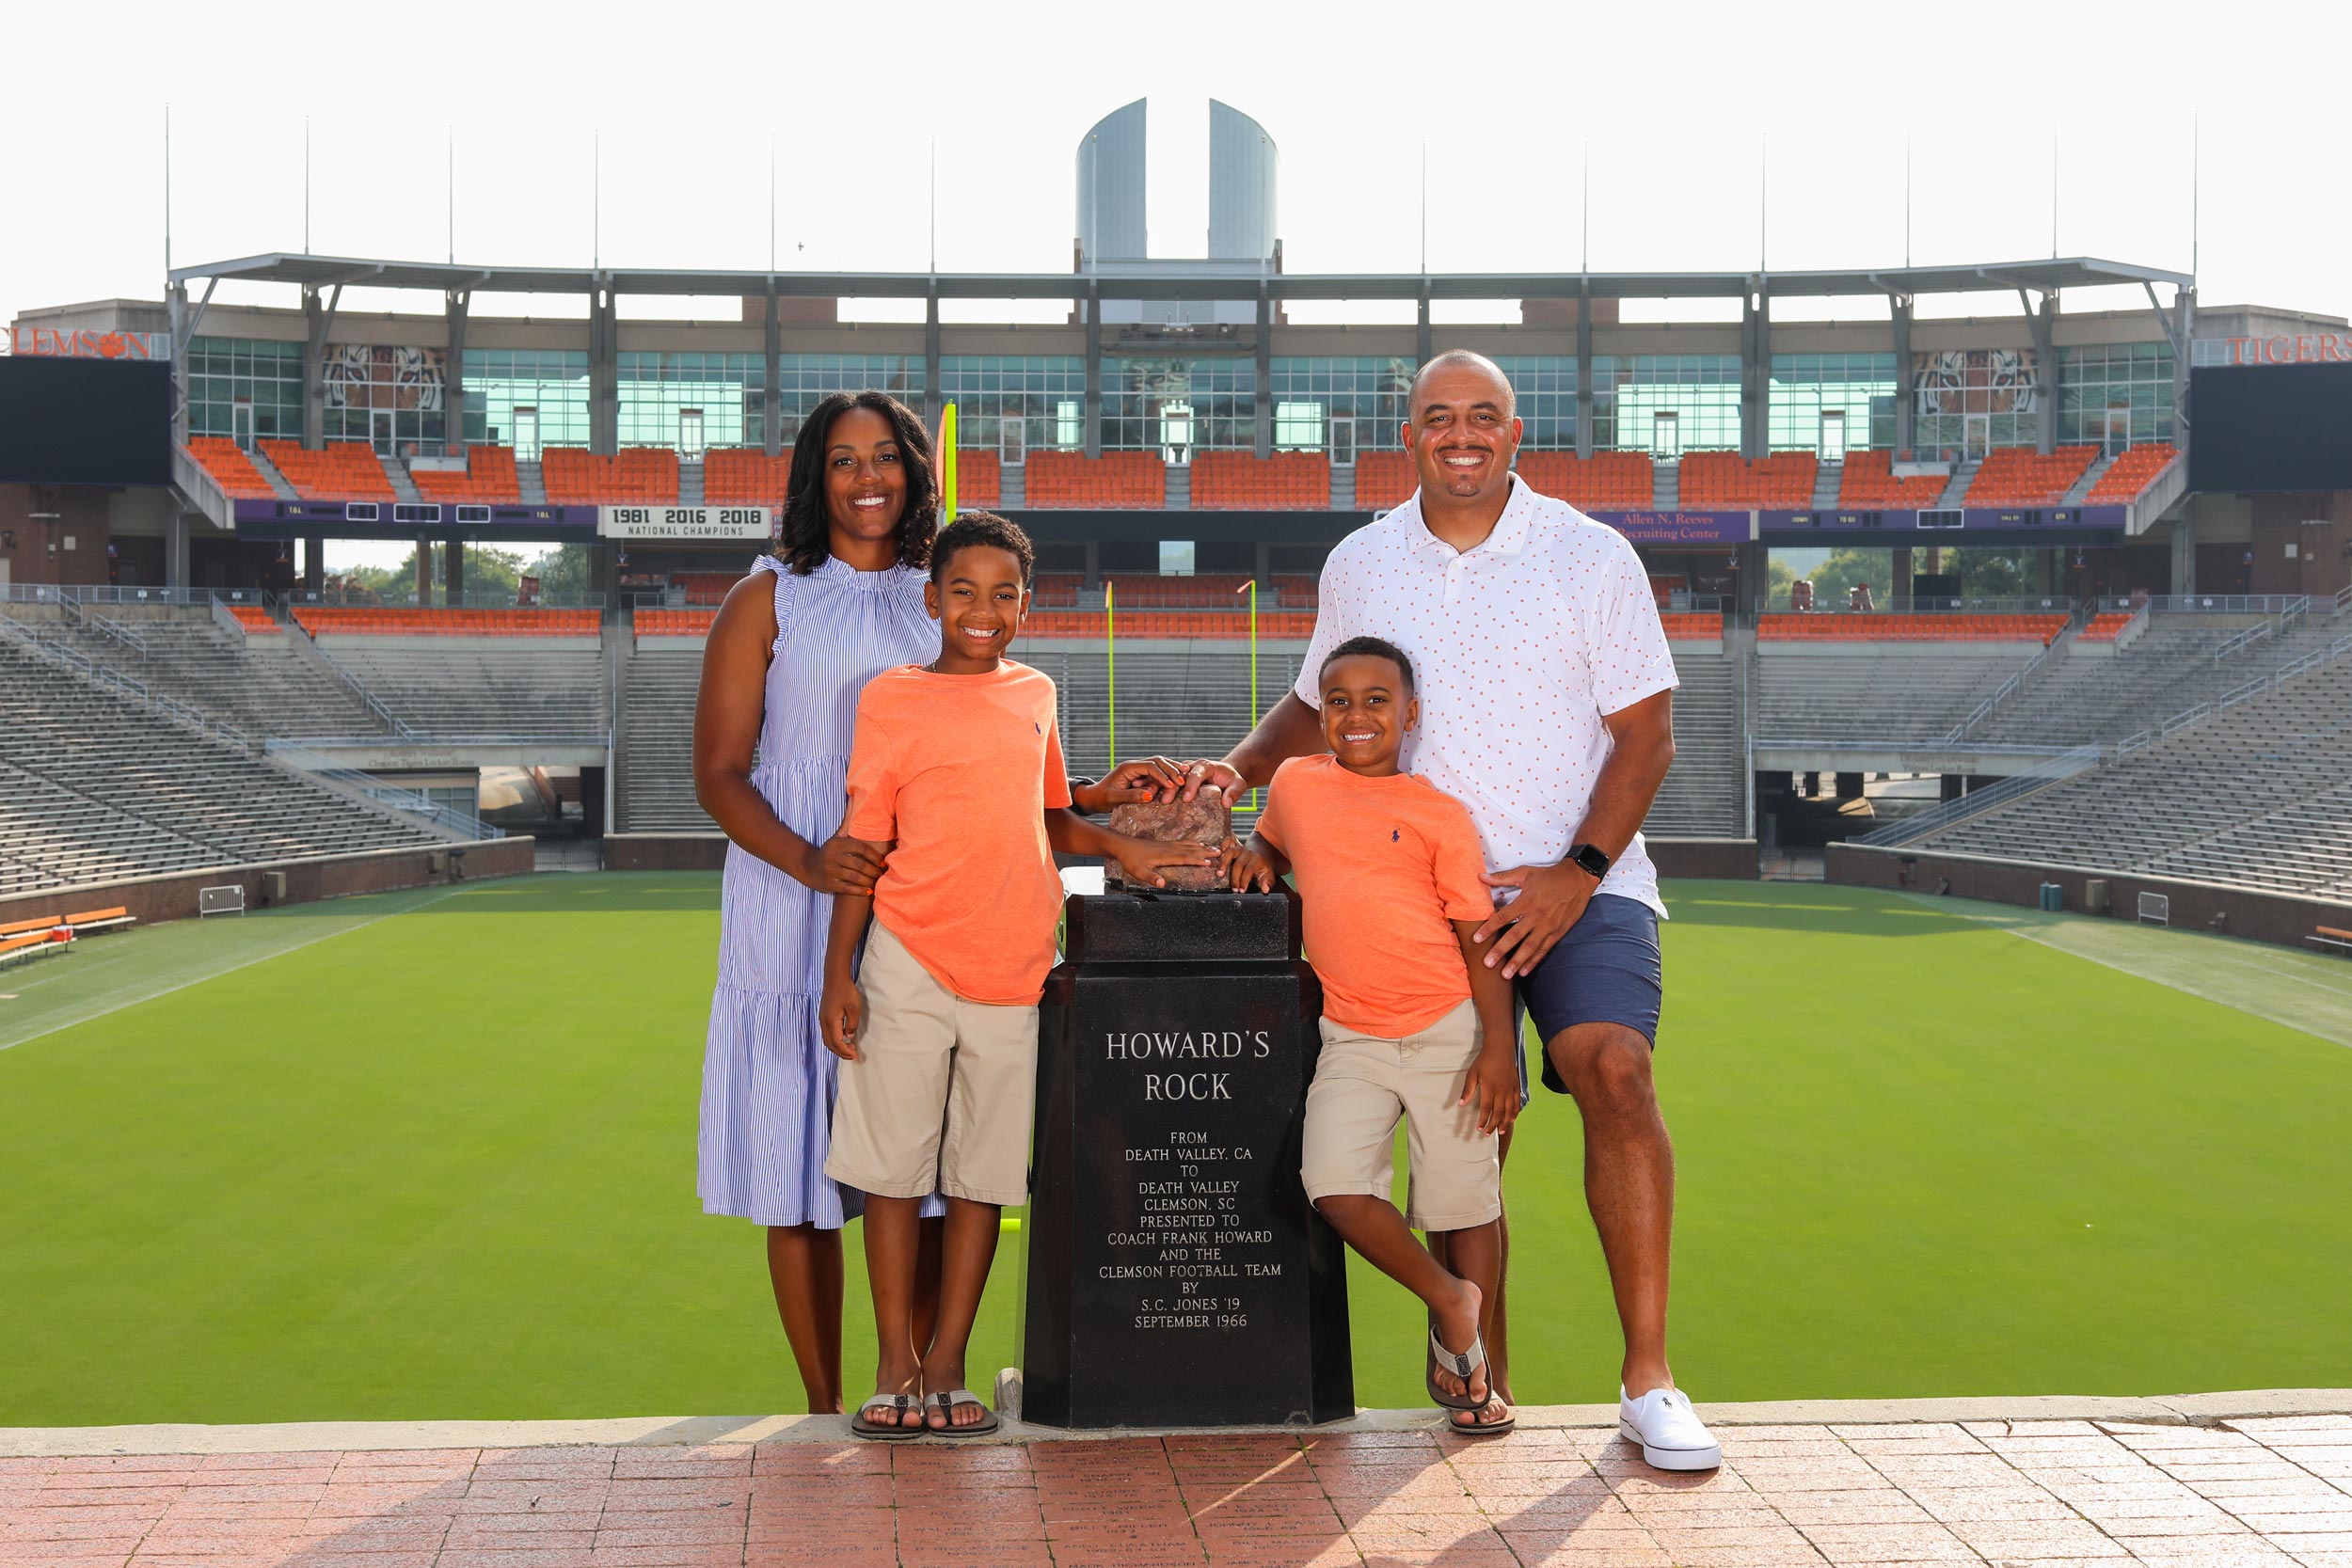 Coach Elliot and His family standing at Howards Rock at Scott Stadium